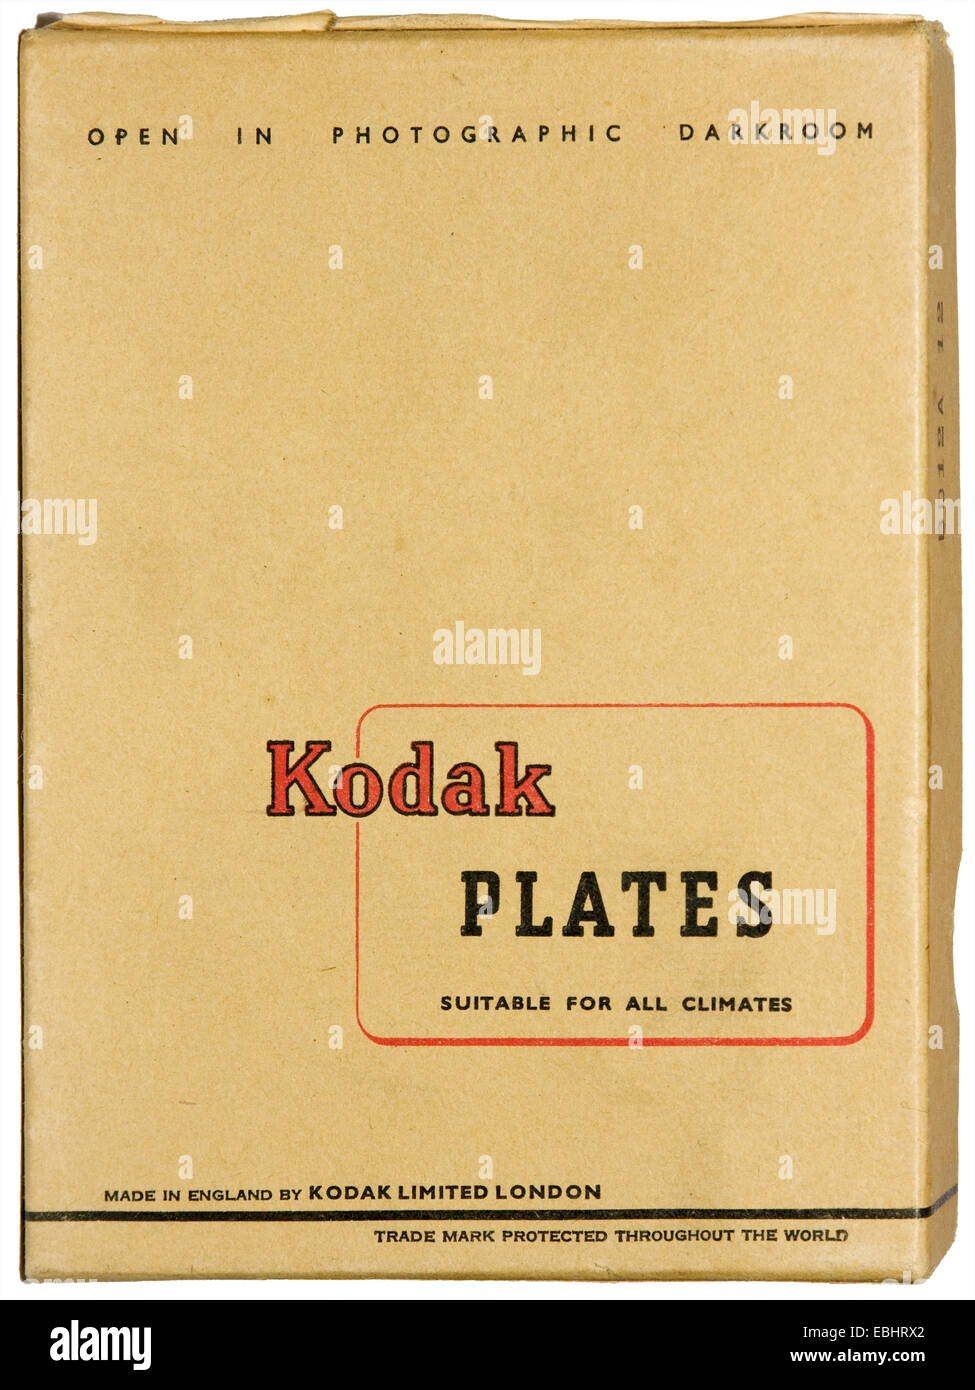 Photographic plates, here in glass, with light-sensitive silver emulsion, preceeded photographic film in cameras. Stock Photo